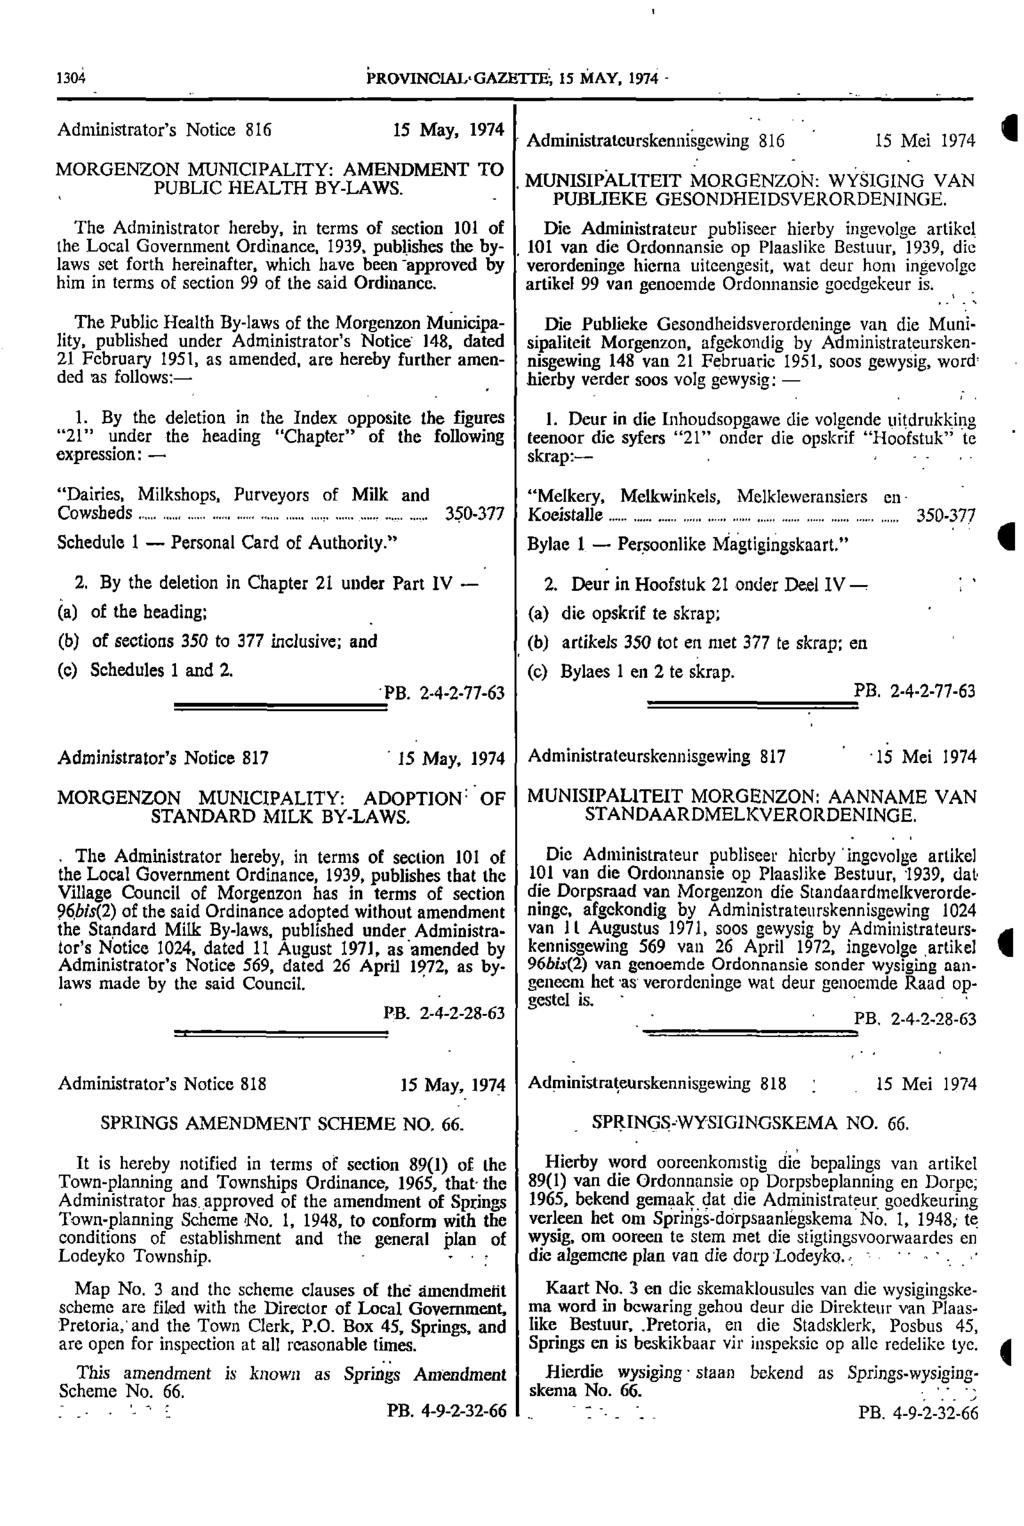 304 iprovincalgazeite; 5 MAY 974 Administrators Notice 86 5 May 974 Administrateurskennisgewing 86 5 Mei 974 MORGENZON MUNICIPALITY: AMENDMENT TO PUBLIC HEALTH BY LAWS MUNISIPALITEIT MORGENZON: